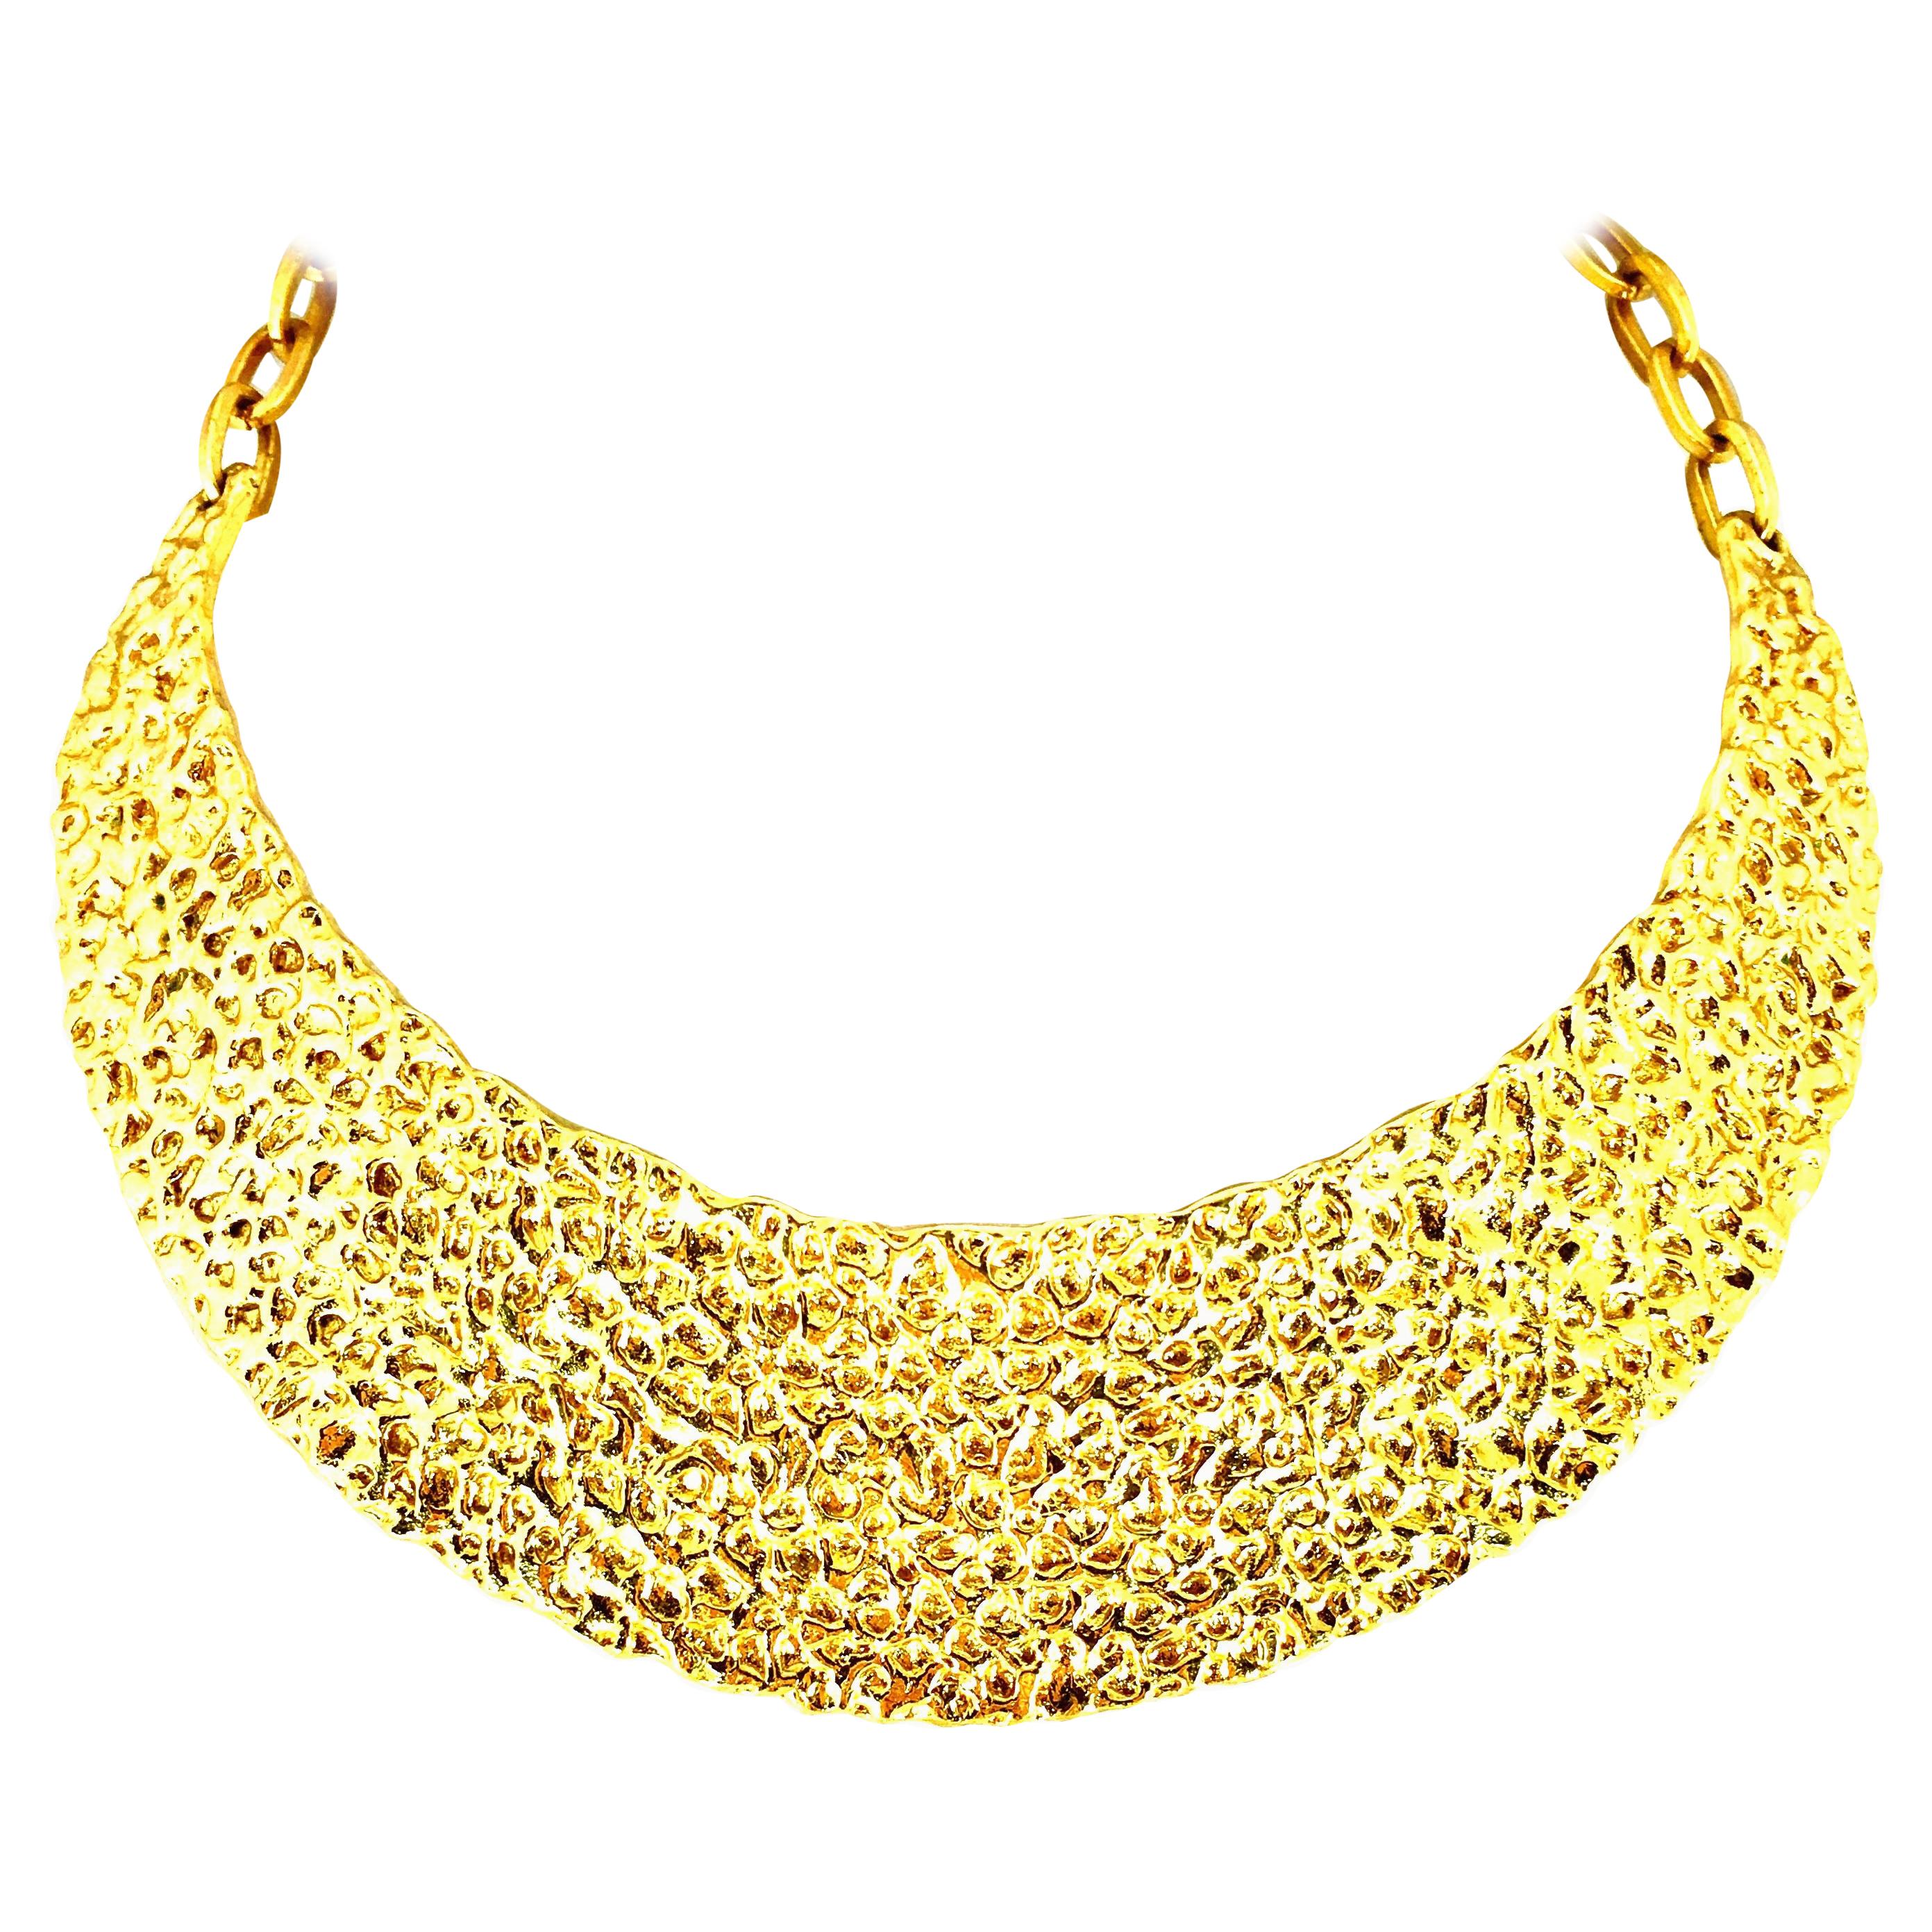 20th Century Modernist Gold Hammered Collar Choker Style Necklace By, Trifari For Sale